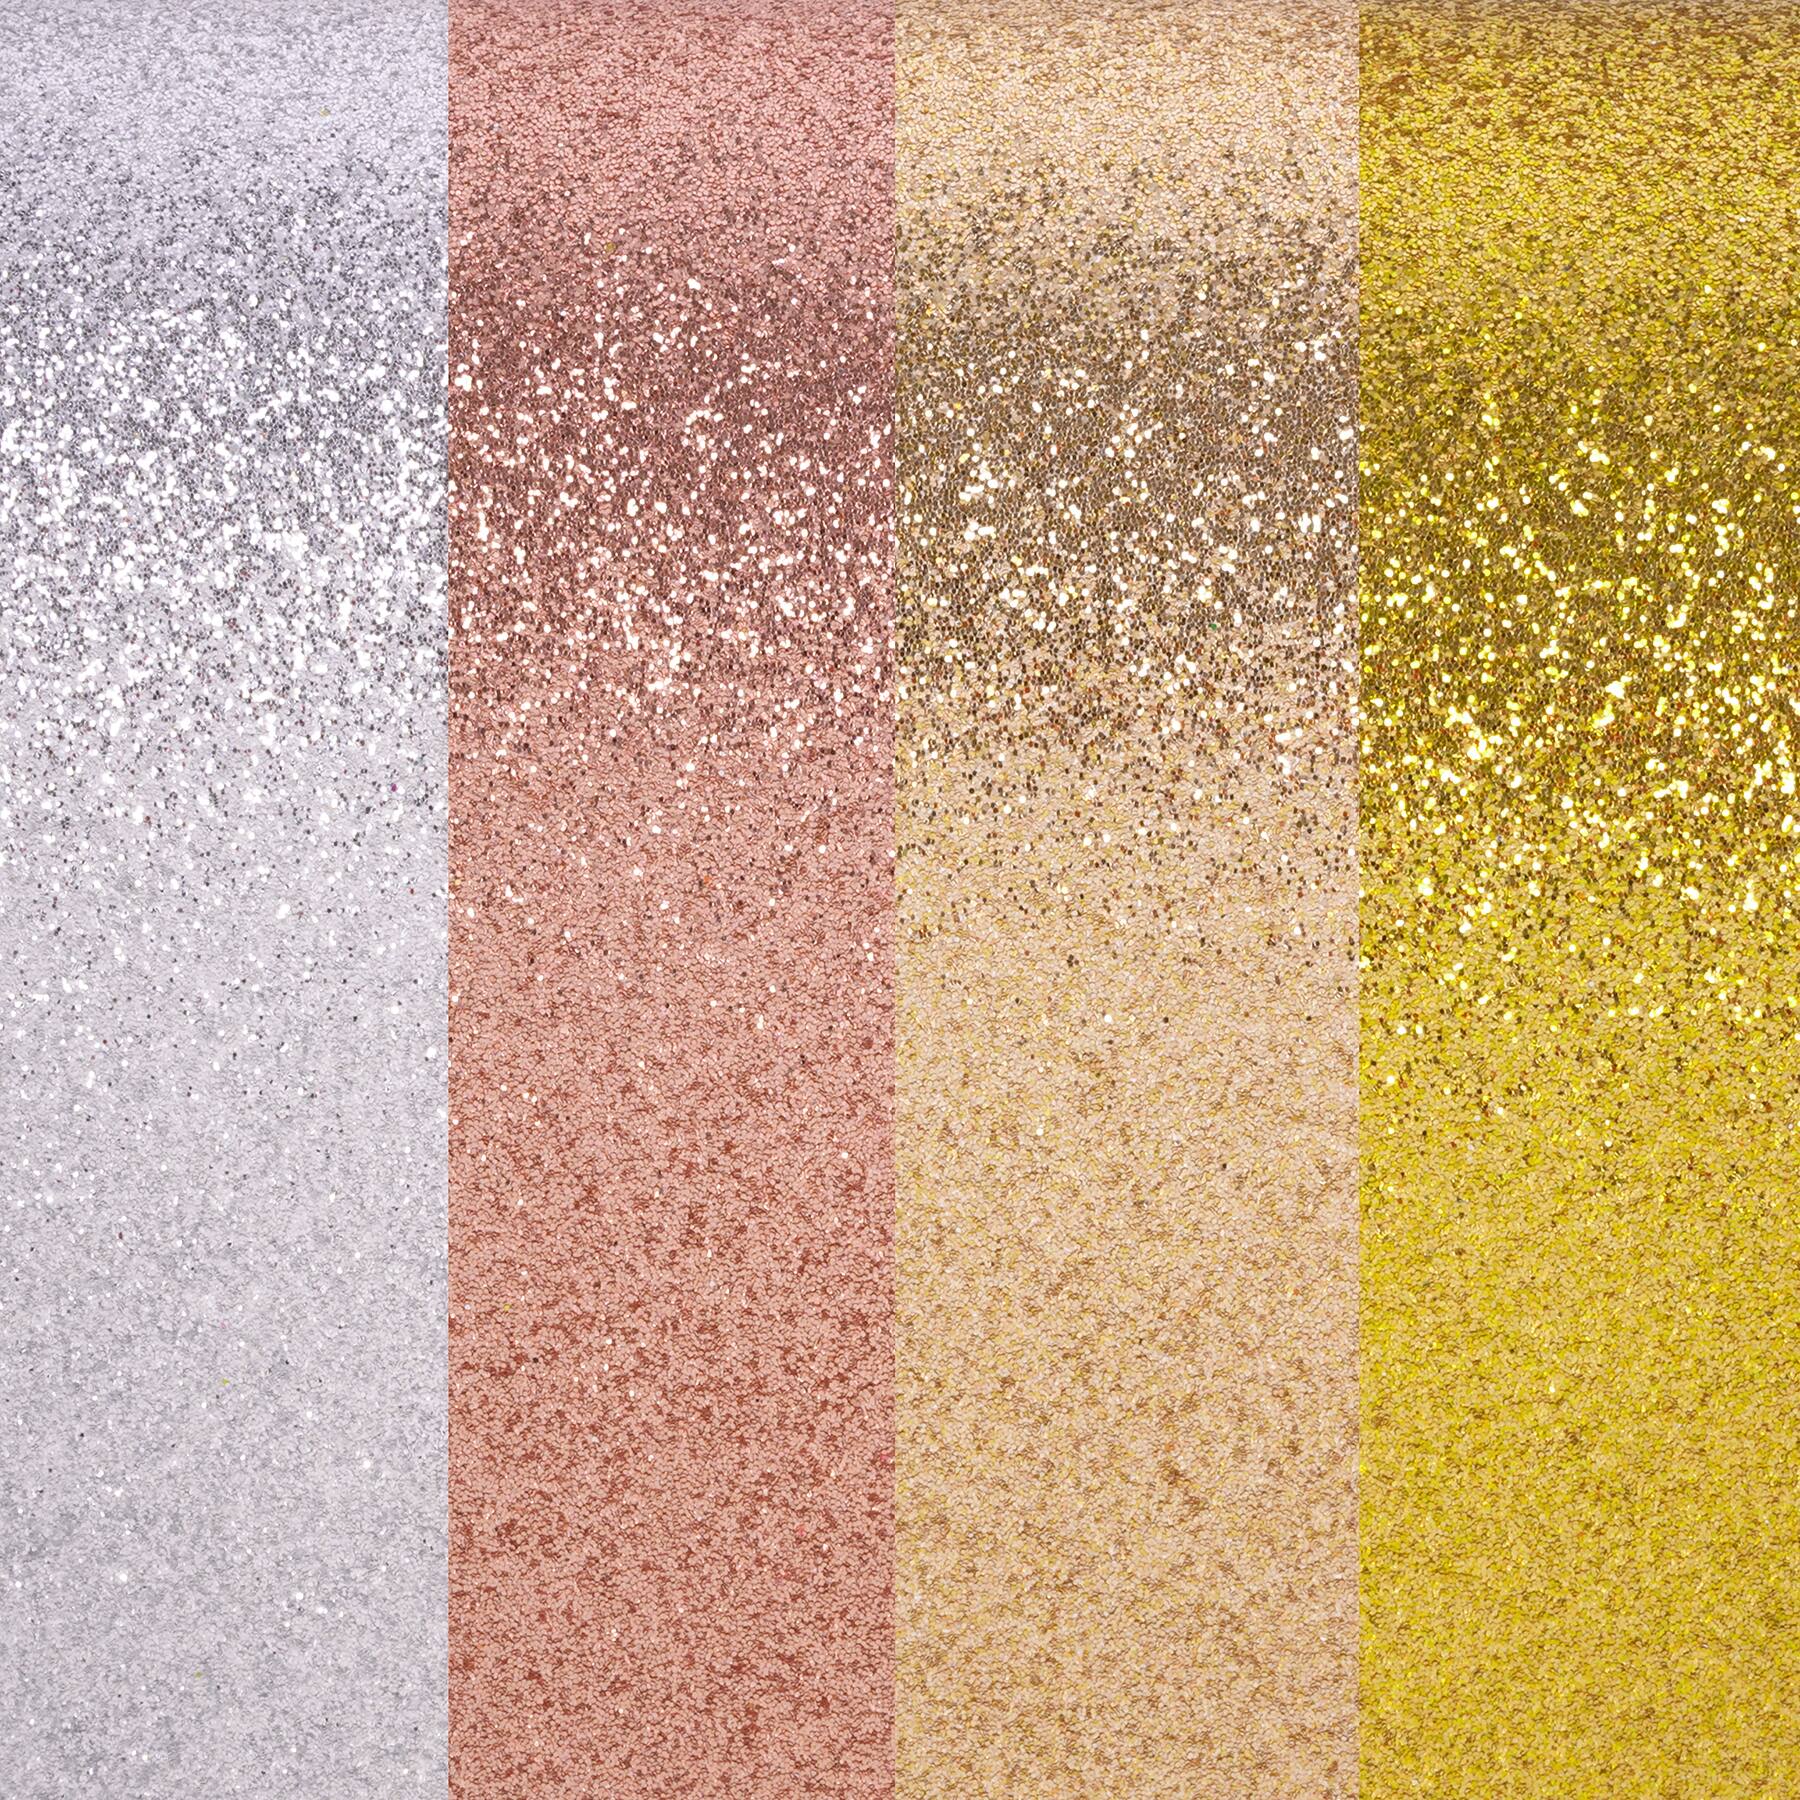 Gold Glitter 8.5 x 11 Cardstock Paper by Recollections 24 Sheets | Michaels